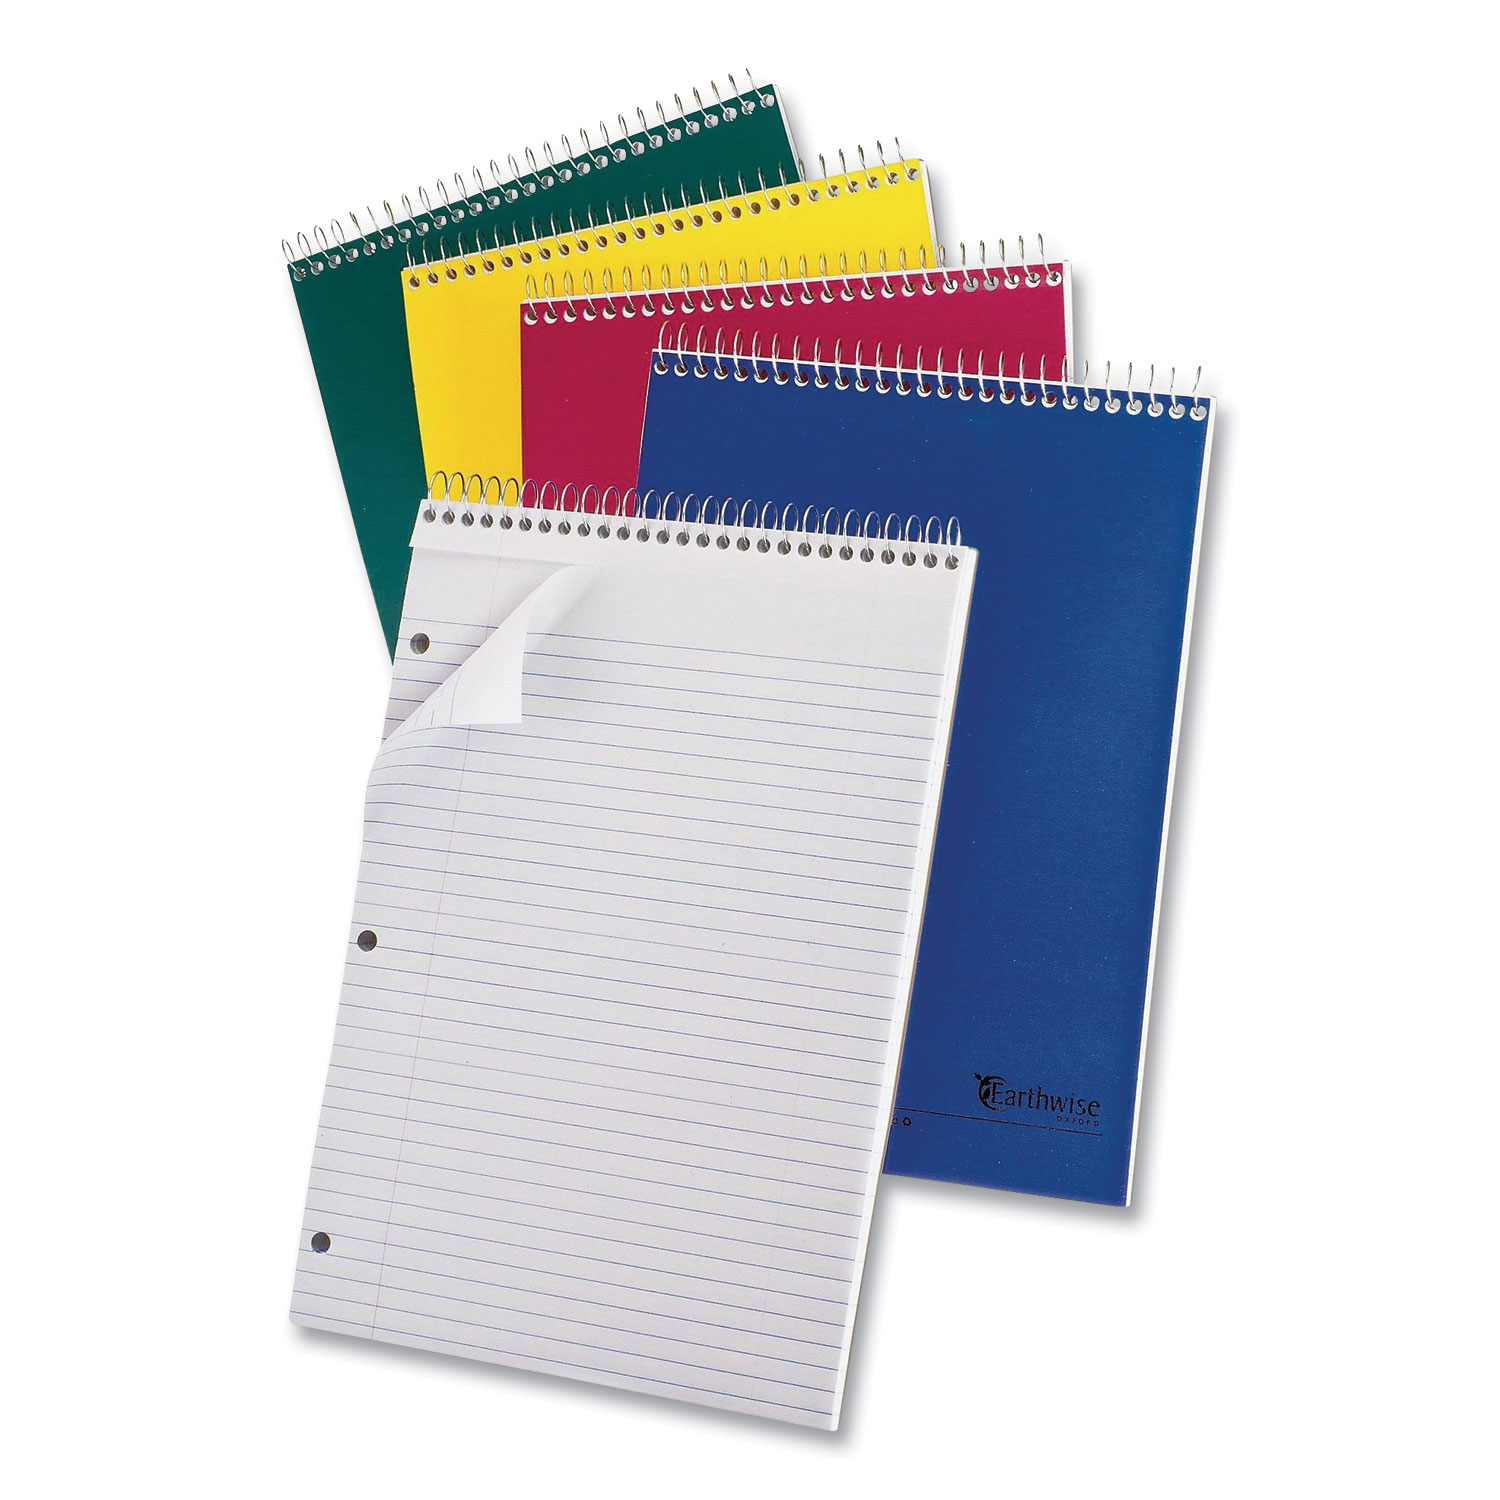  Oxford 25-415R Earthwise by Oxford One-Subject Notebook, Medium/College Rule, Randomly Assorted Color Covers, 8.5 x 11.75, 80 Sheets (OXF800896) 